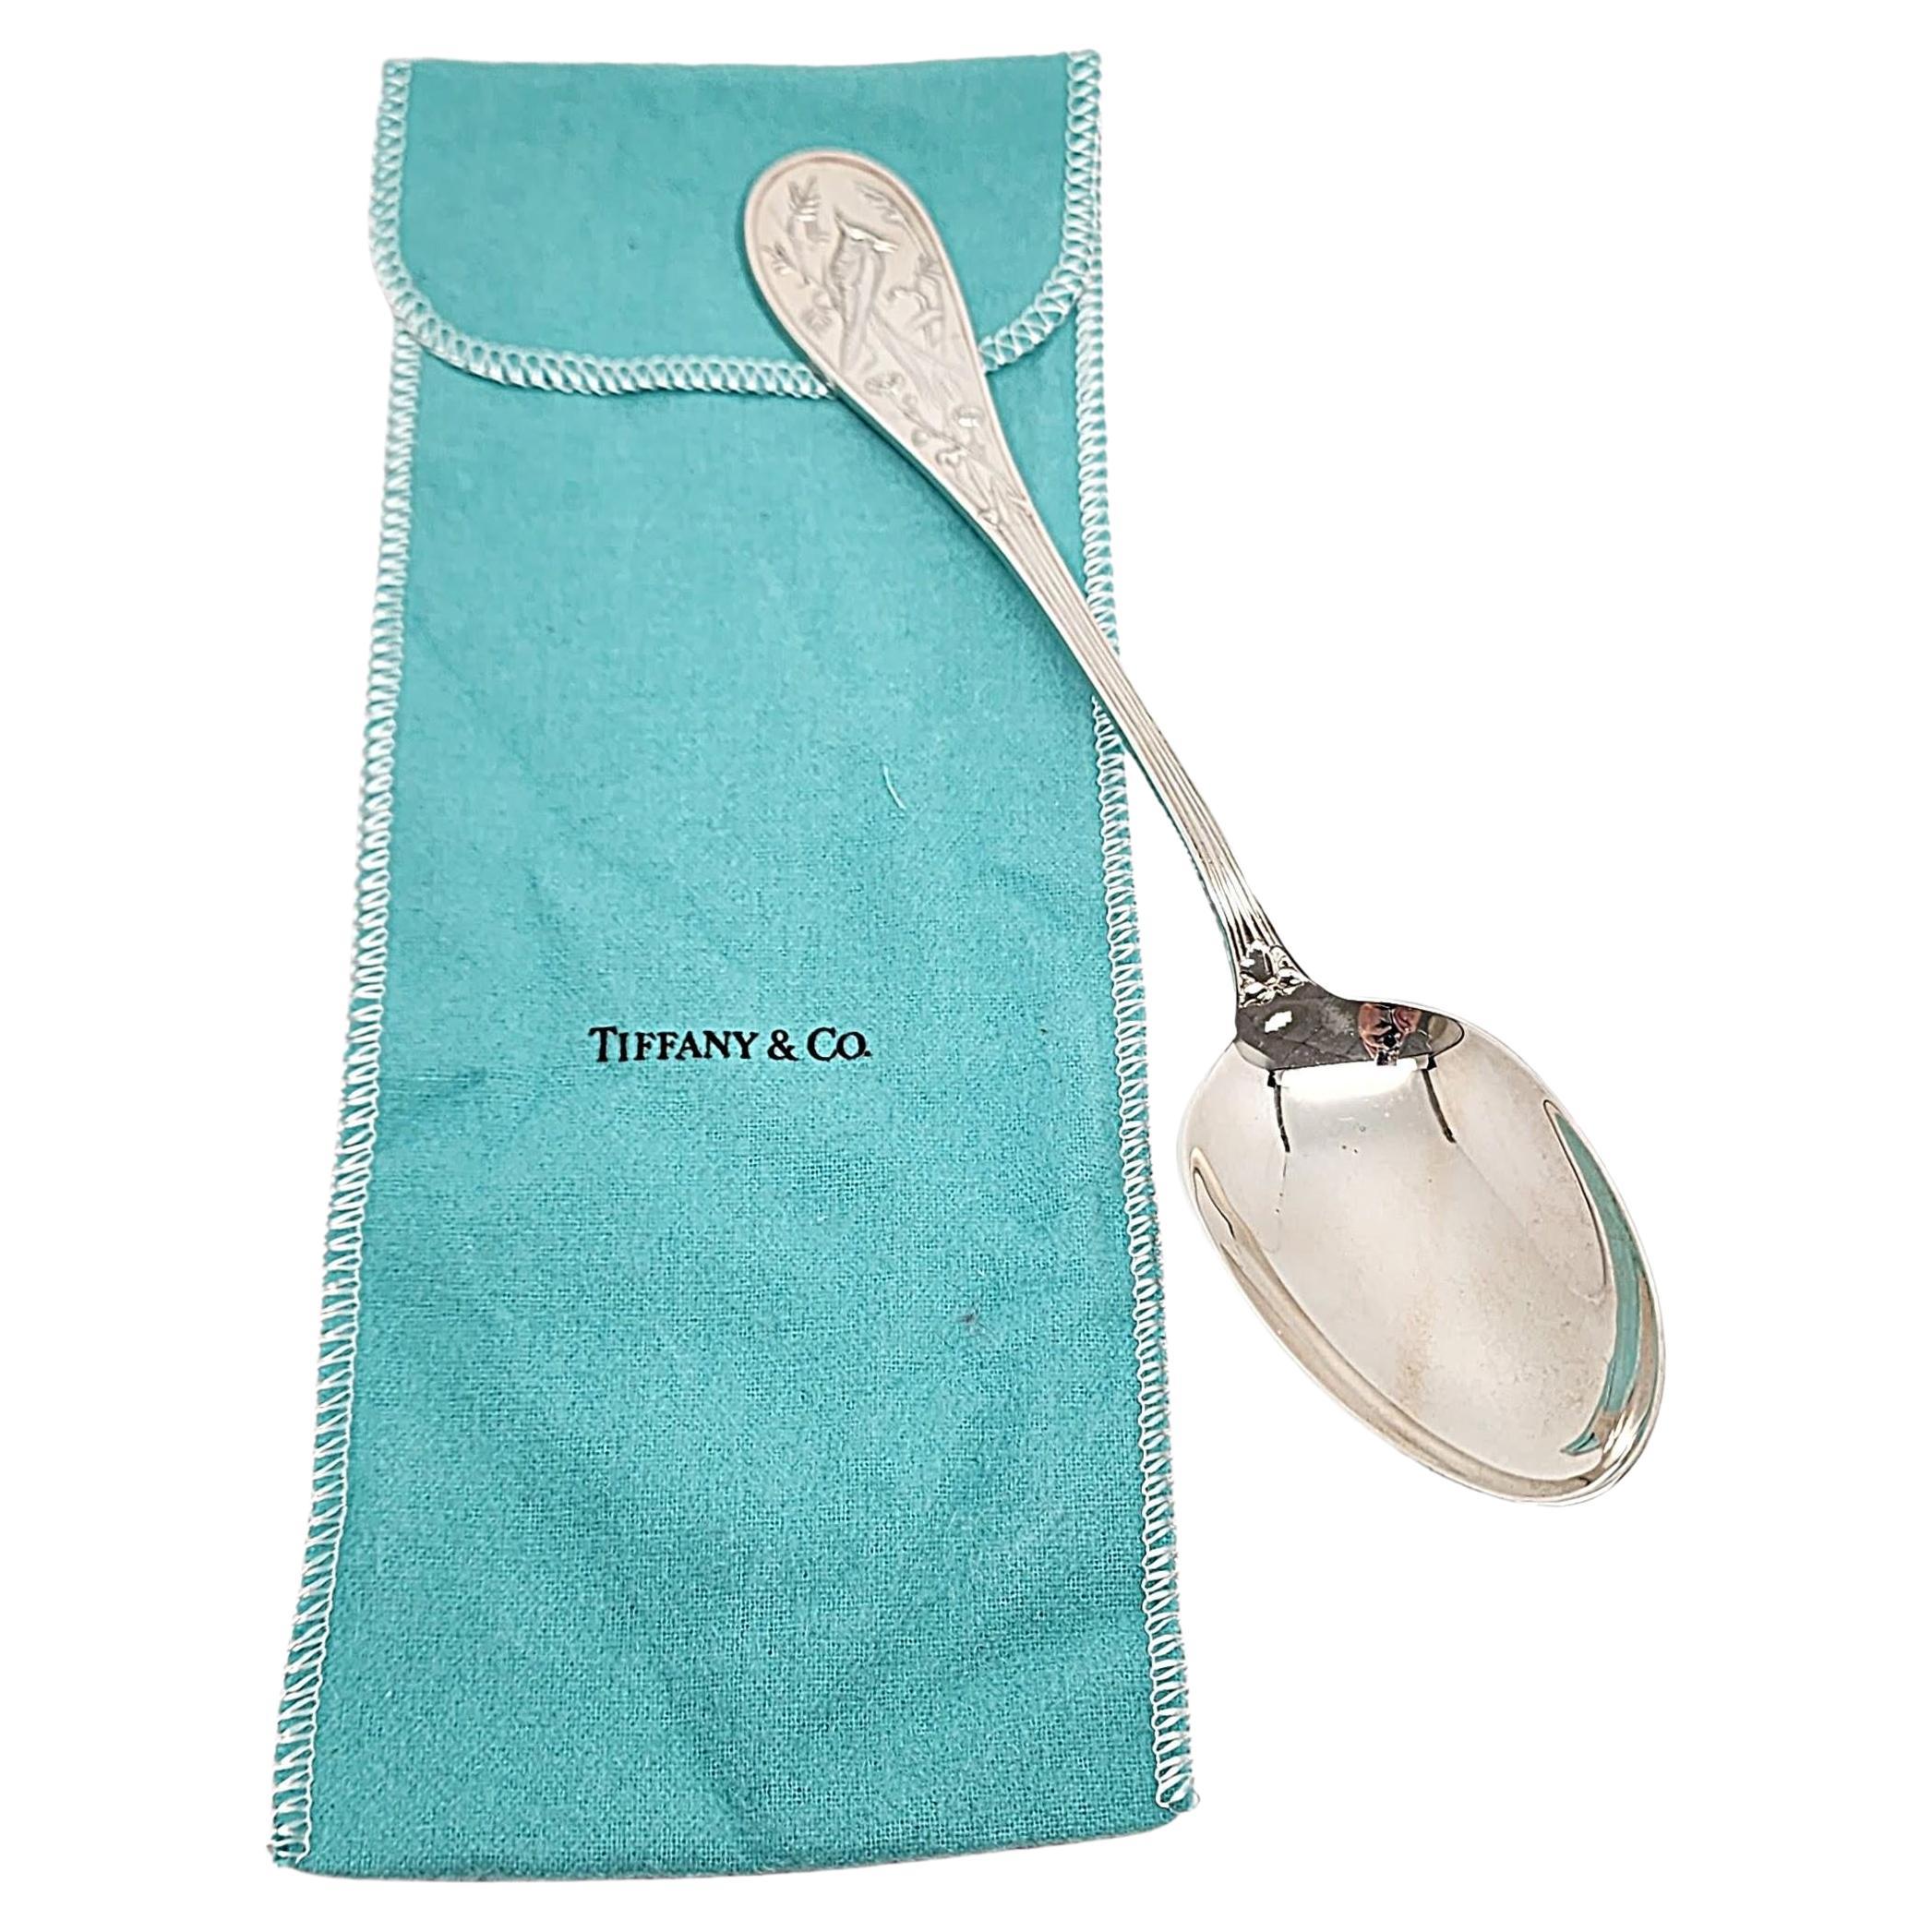 Tiffany & Co Audubon Sterling Silver Serving Tablespoon 8 5/8" w/Pouch #15345 For Sale